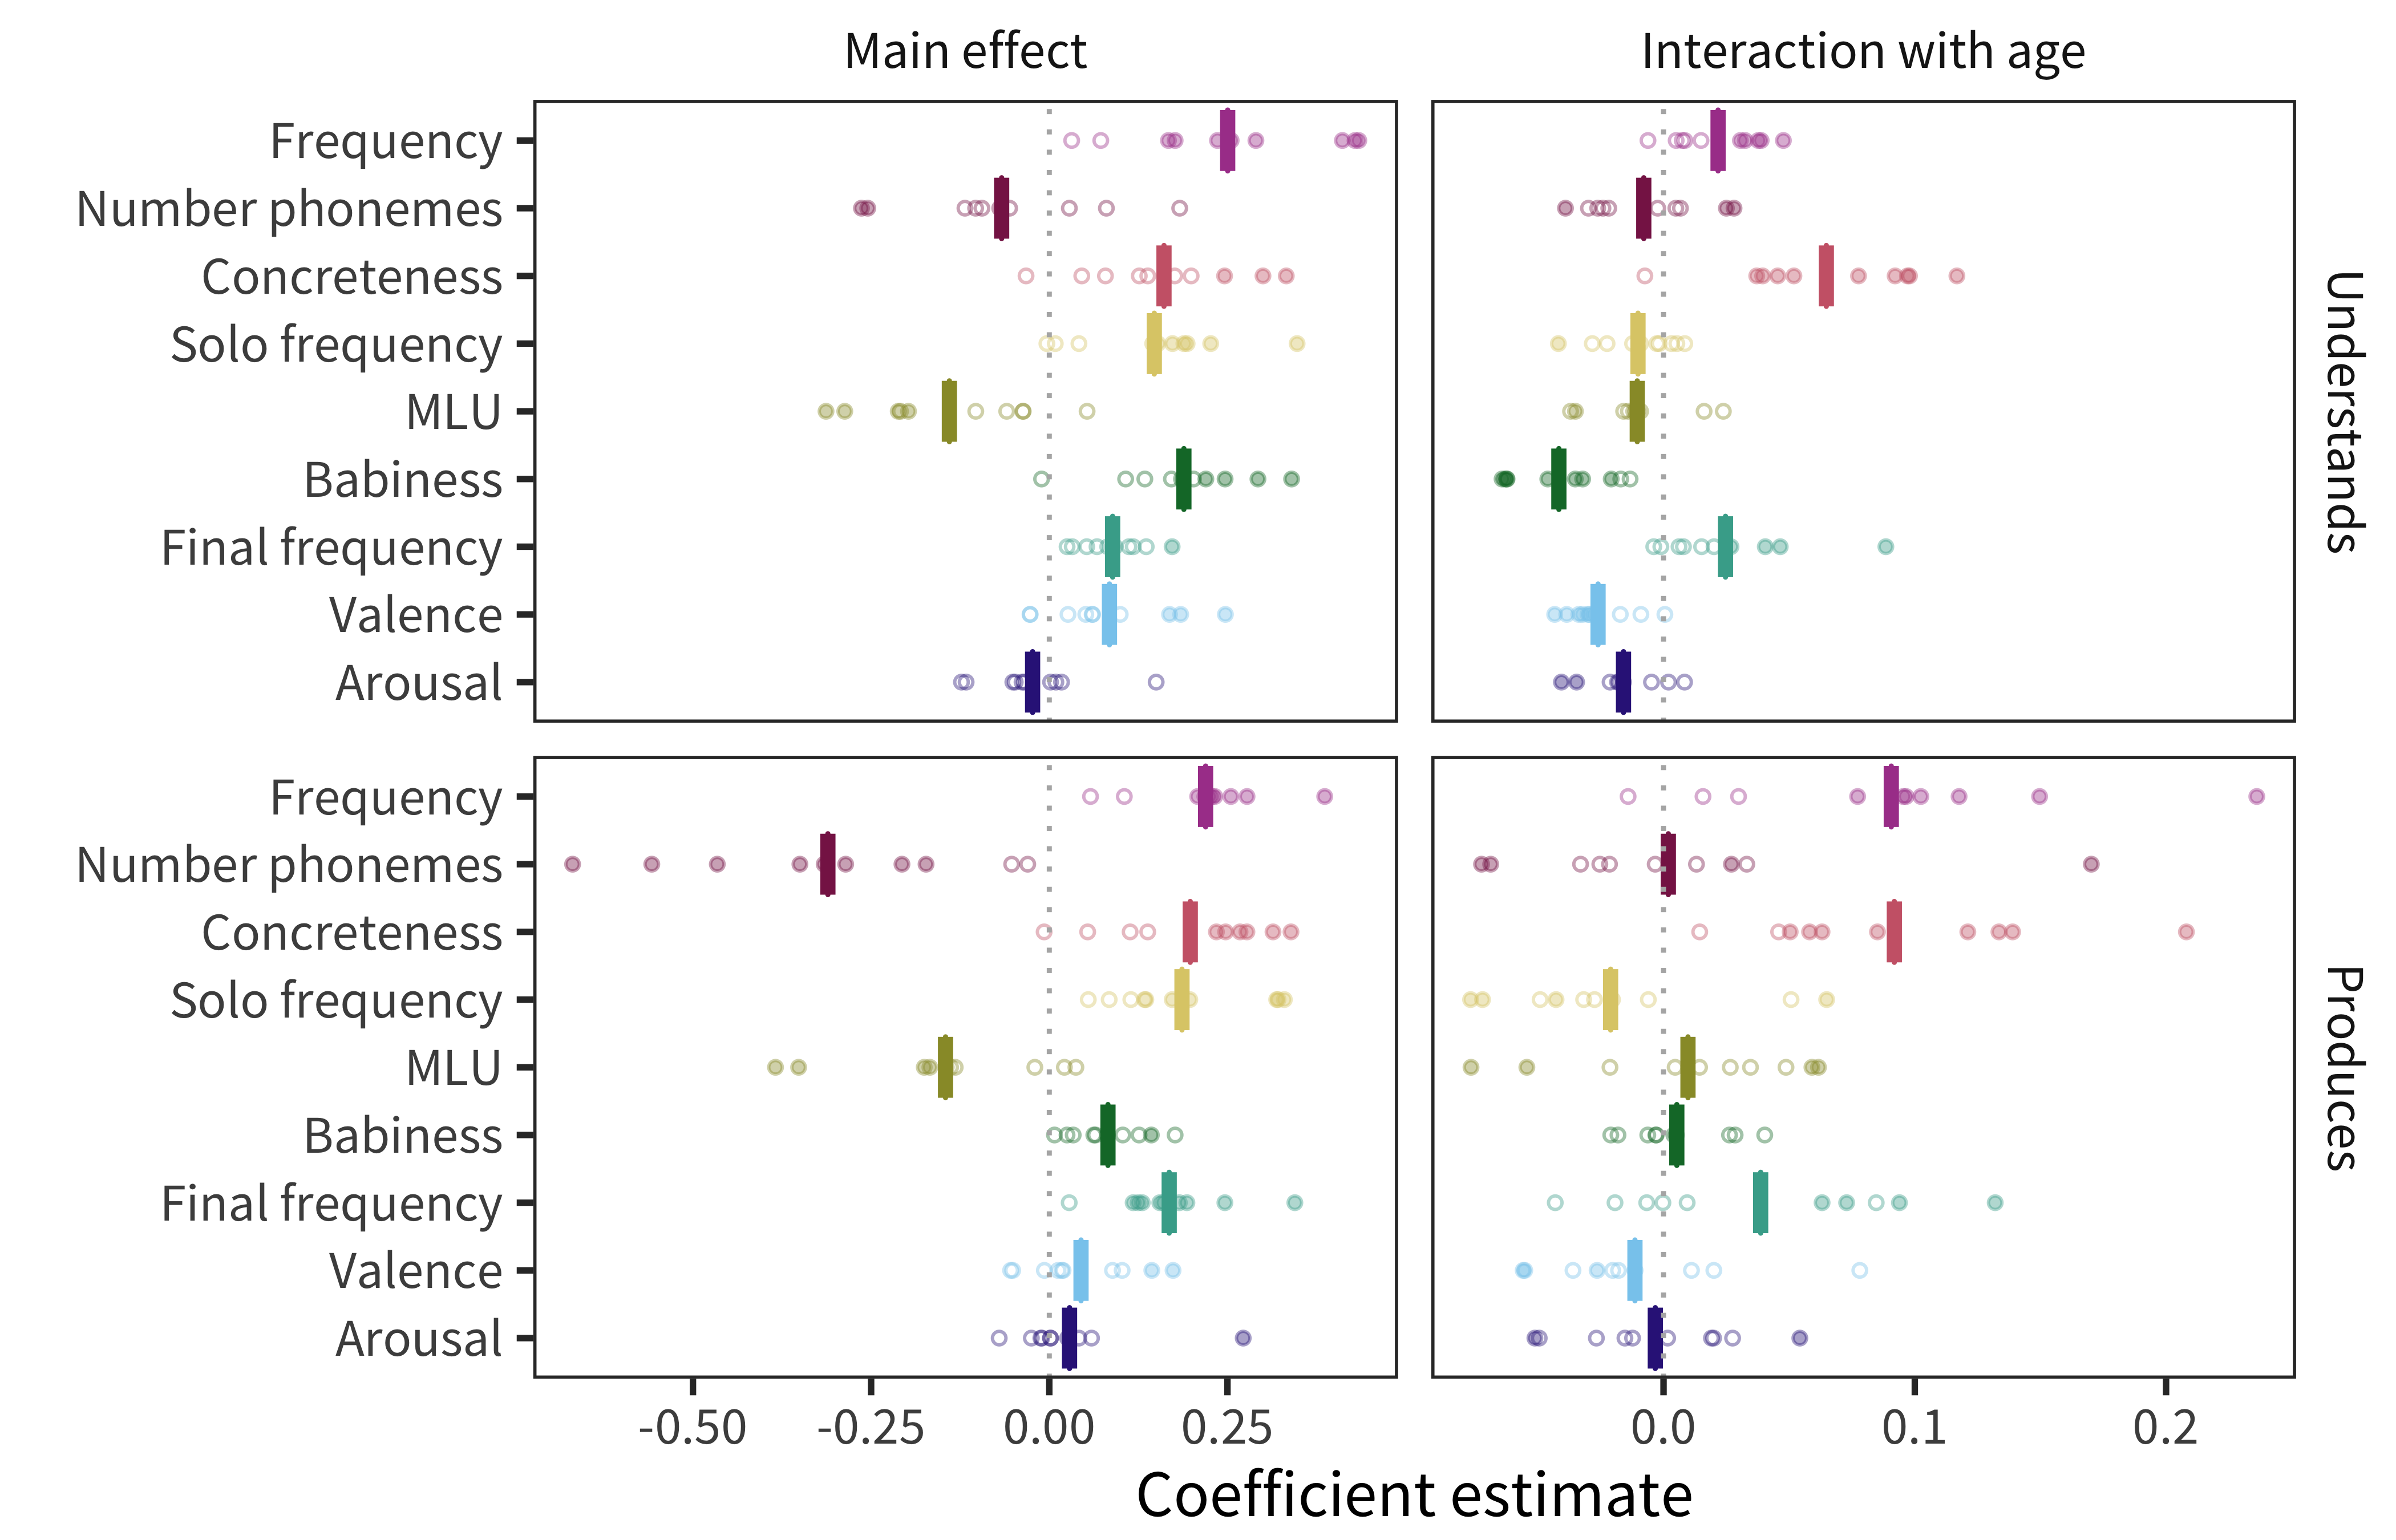 Estimates of coefficients in predicting words’ developmental trajectories for all languages and measures. Each point represents a predictor’s coefficient in one language, with the bar showing the mean across languages. Filled in points indicate coefficients for which p < 0.05.